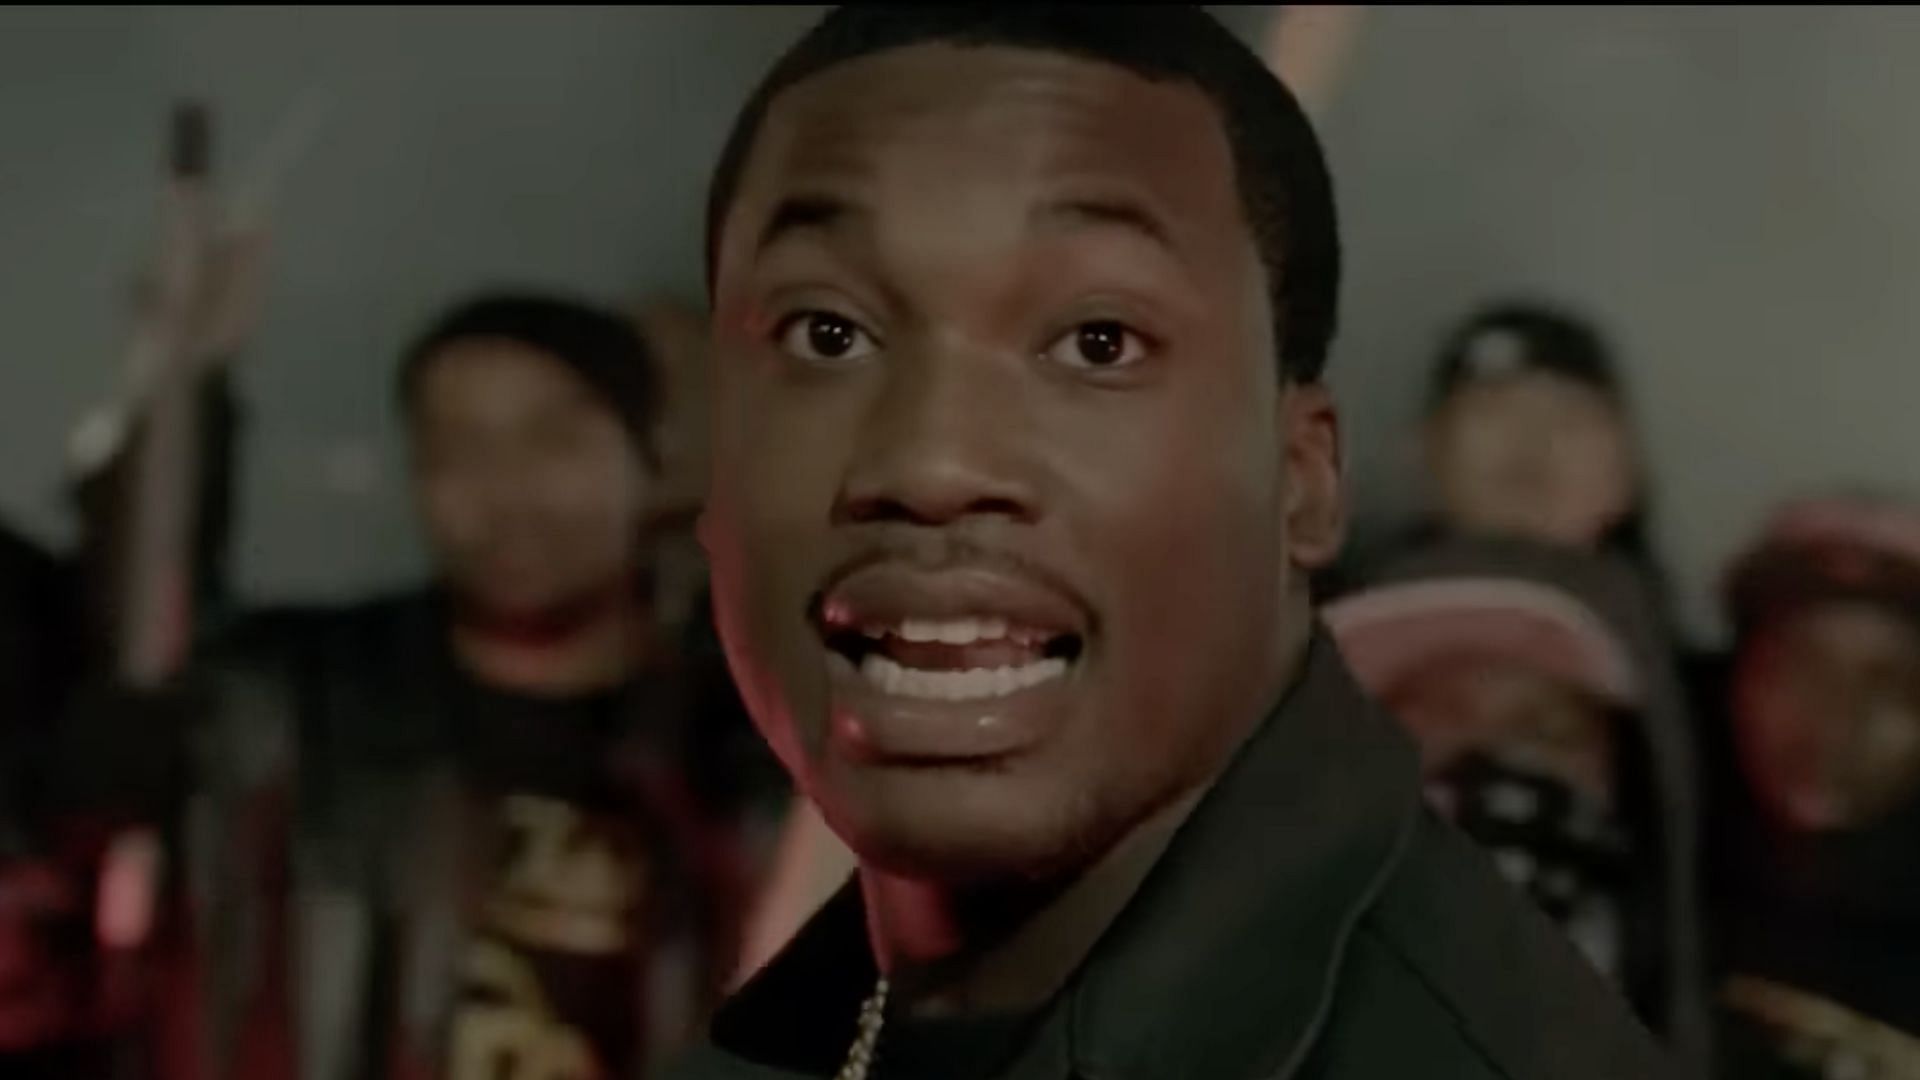 Meek Mill in the music video for 